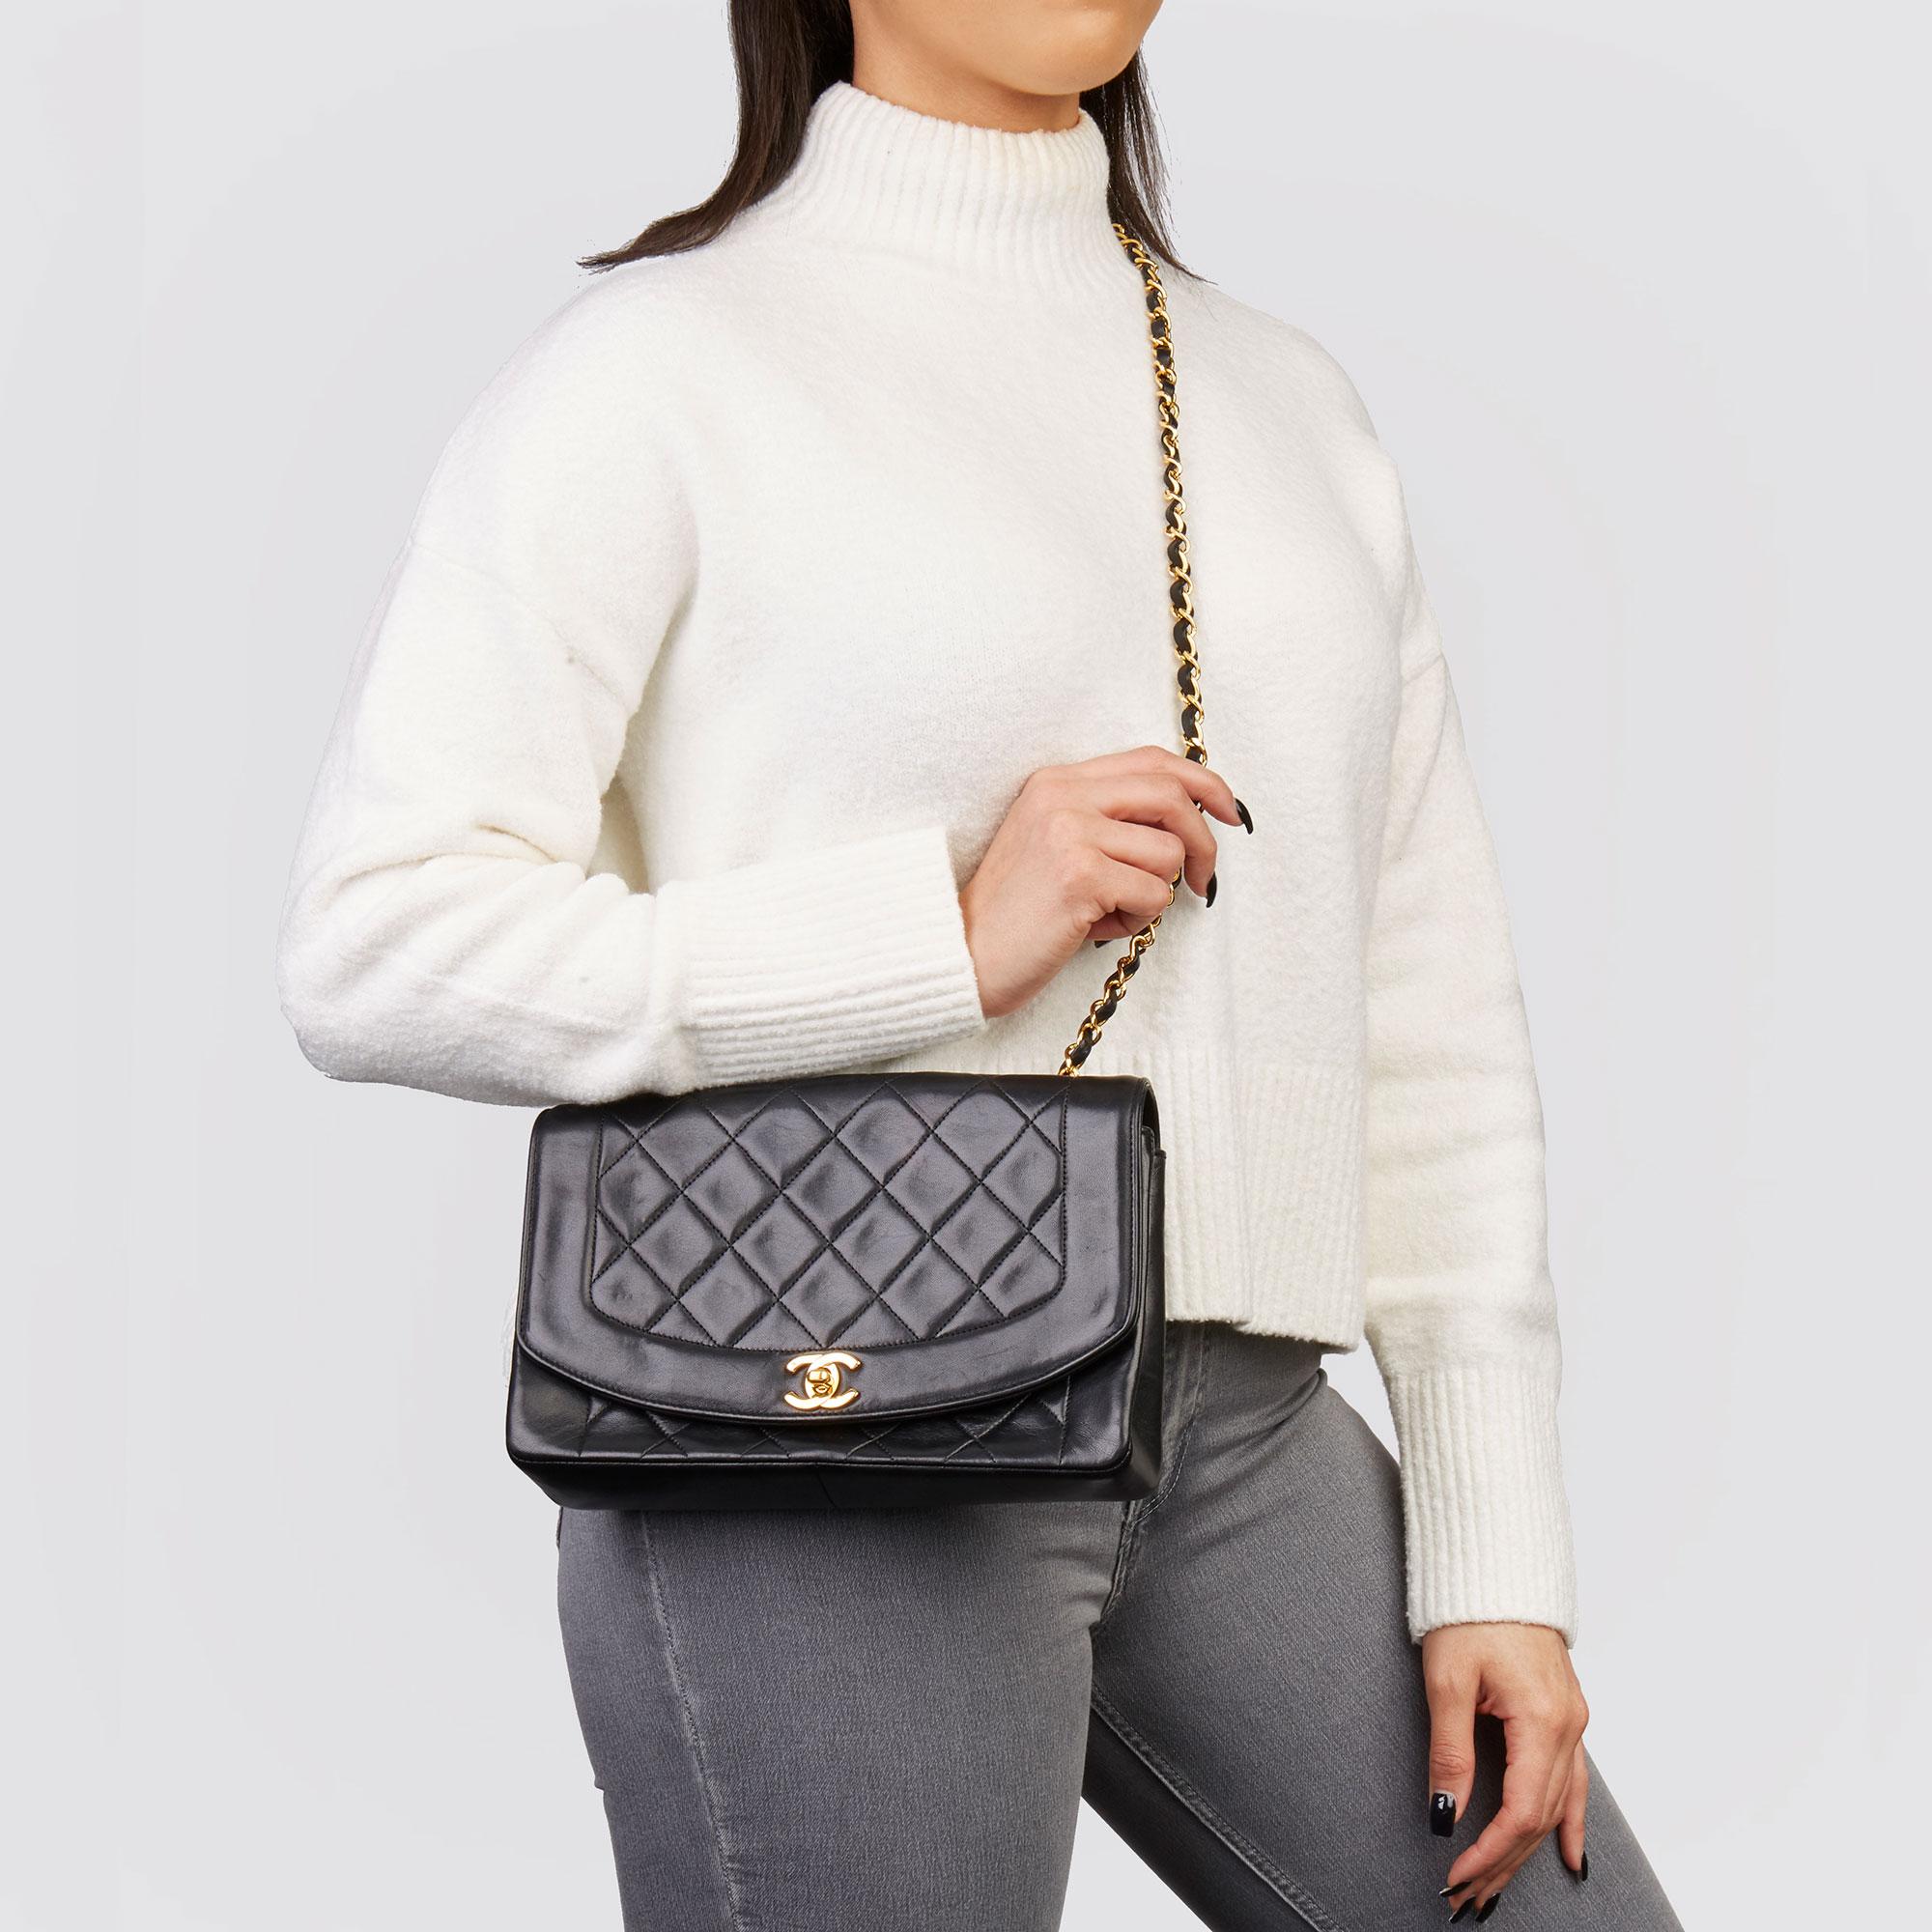 CHANEL 
Black Quilted Lambskin Vintage Medium Diana Classic Single Flap Bag

Xupes Reference: HB3563
Serial Number: 1876955
Age (Circa): 1991
Accompanied By: Chanel Dust Bag, Authenticity Card
Authenticity Details: Serial Sticker (Made in